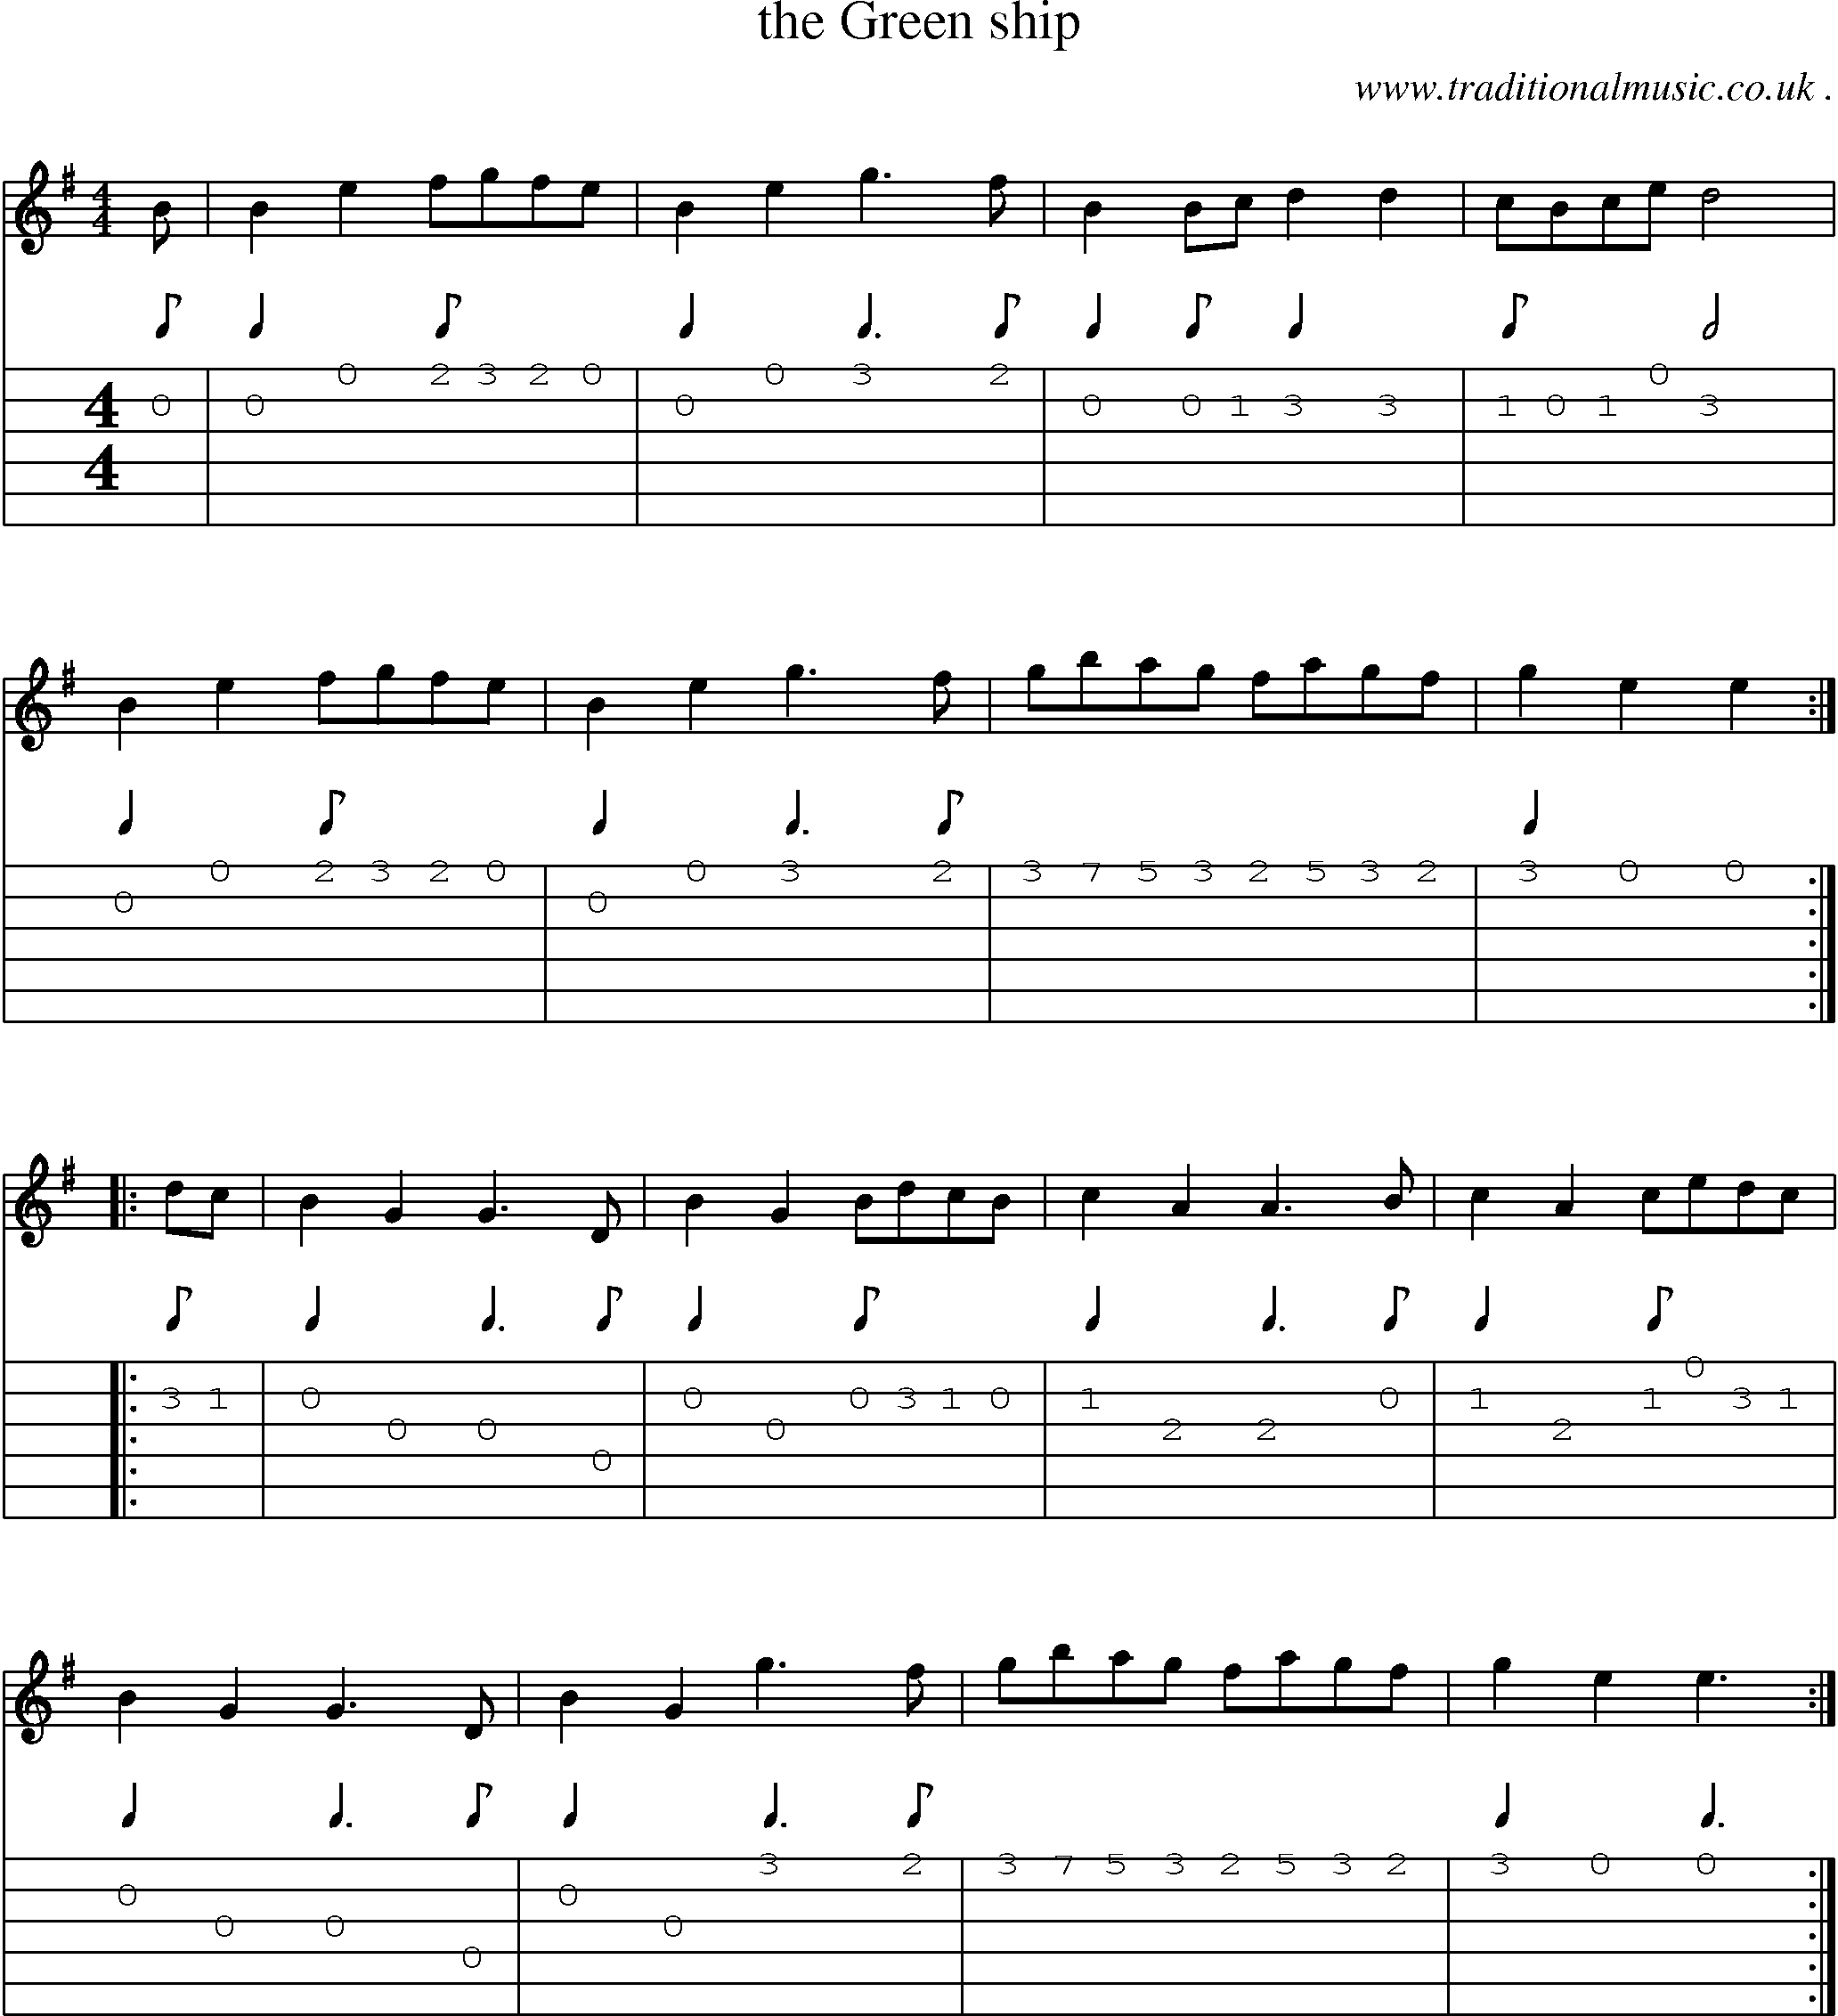 Sheet-Music and Guitar Tabs for The Green Ship